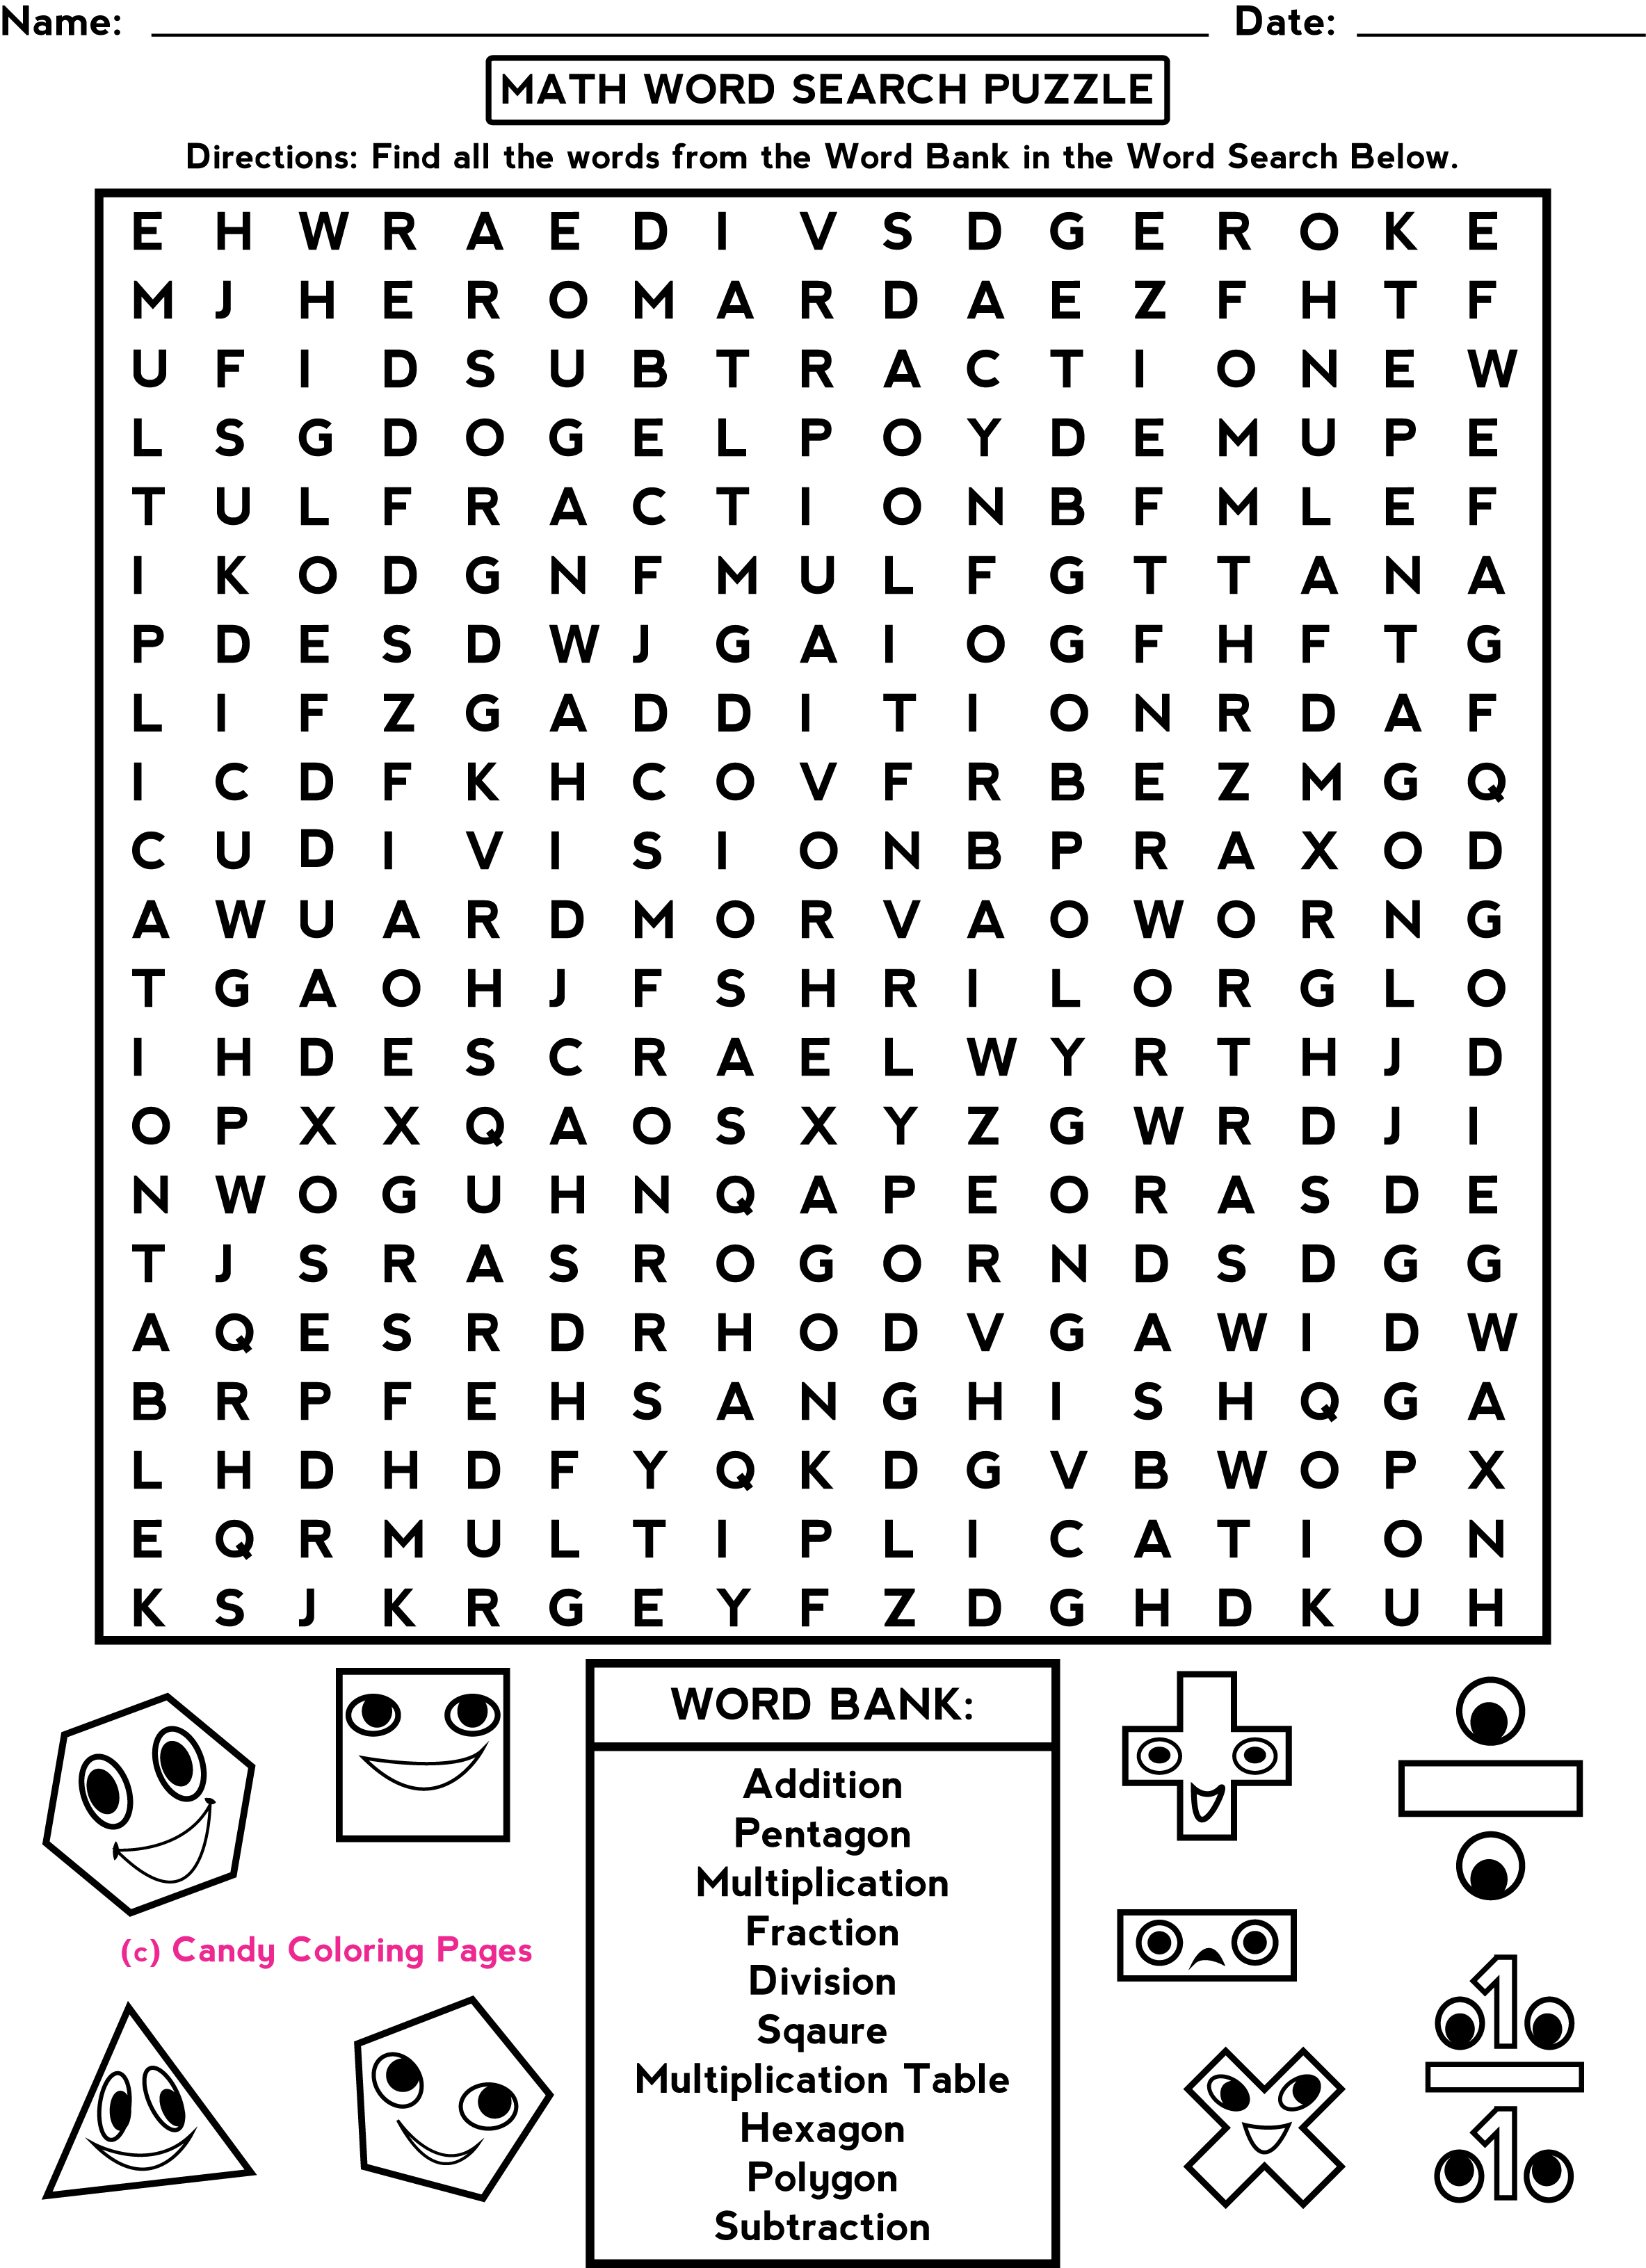 11 Best Images of Fun Math Puzzle Worksheets For 2nd Grade Math Word